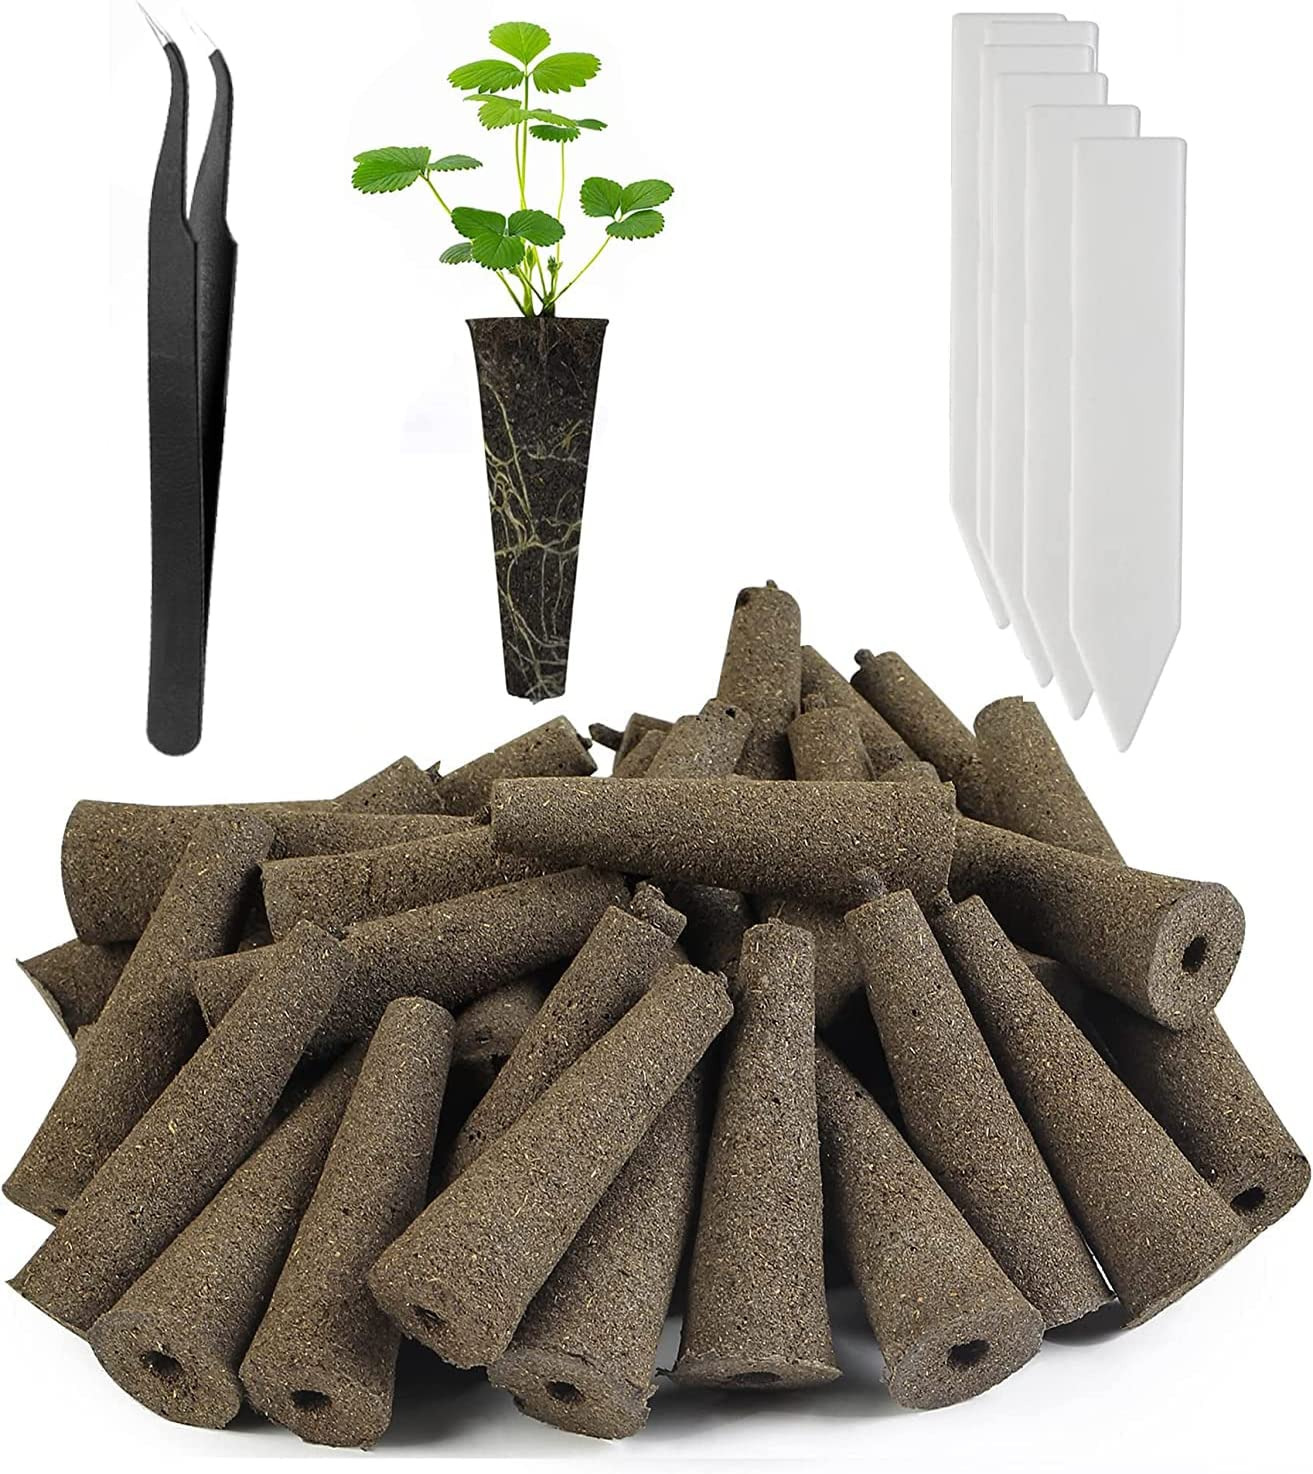 30 Pack Grow Sponges, Replacement Root Growth Sponges Seed Pods Compatible with 